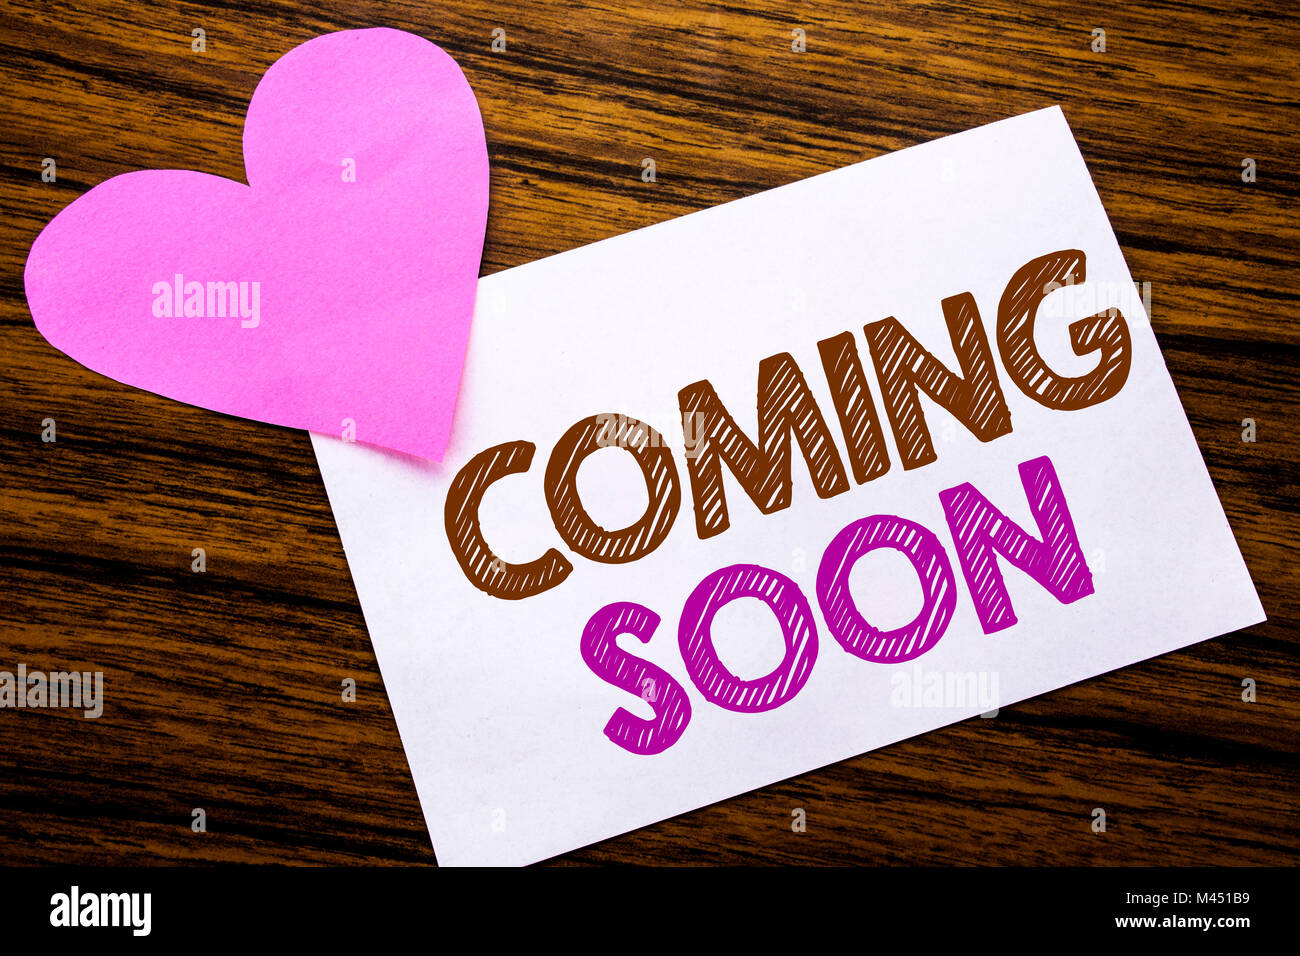 Coming Soon Concept High Resolution Stock Photography And Images